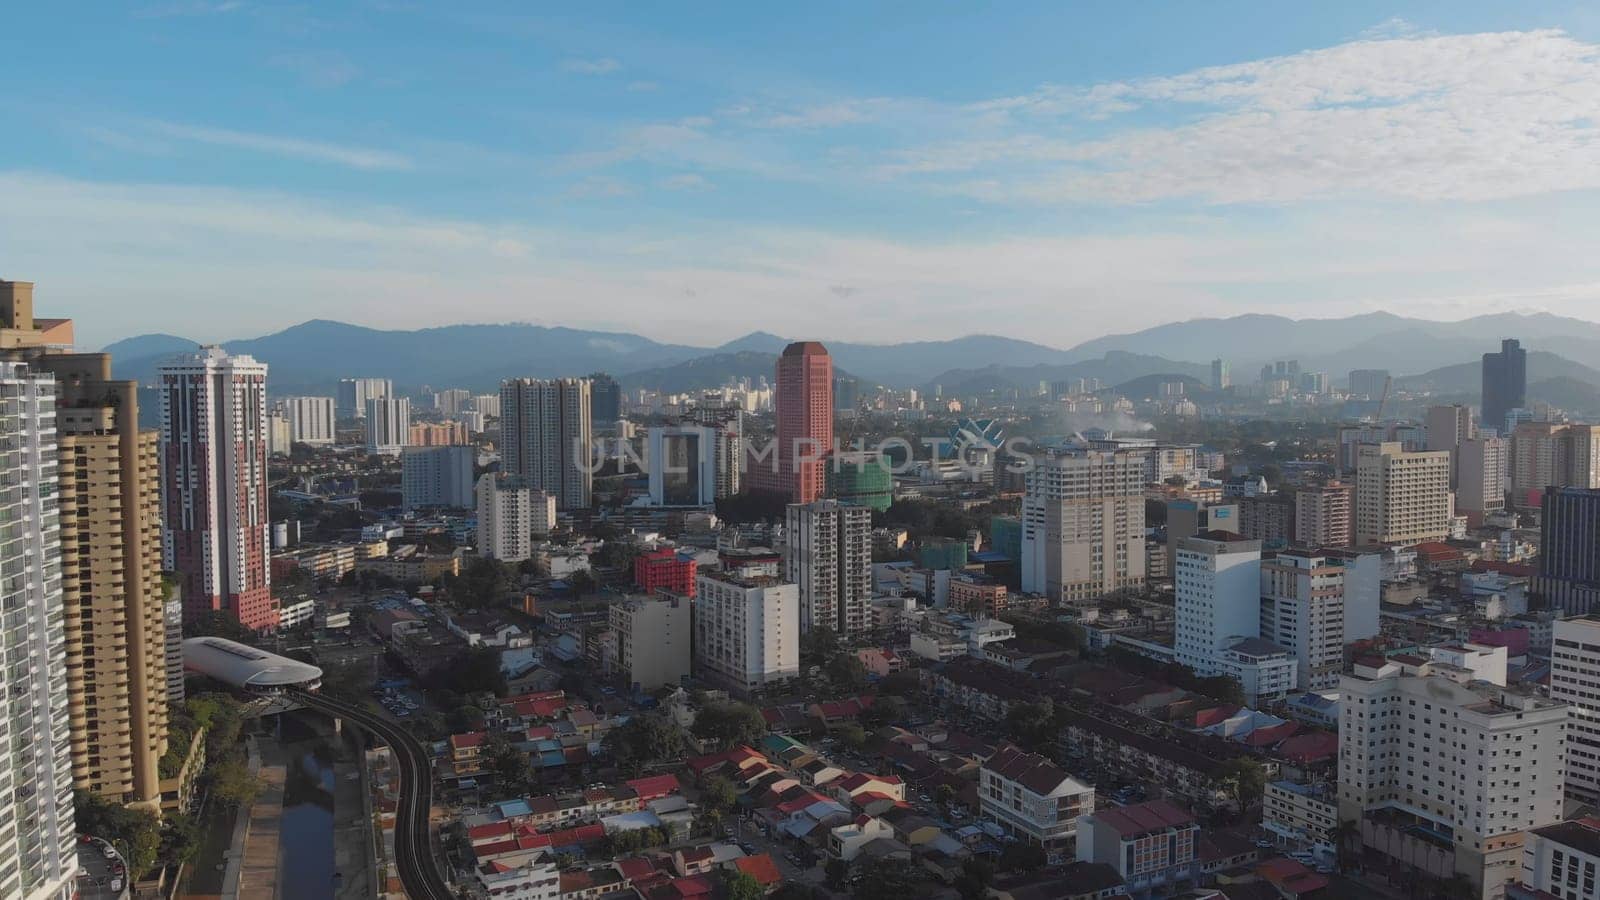 Aerial view from Drone : Downtown at Bukit Jalil City, Malaysia in early morning.